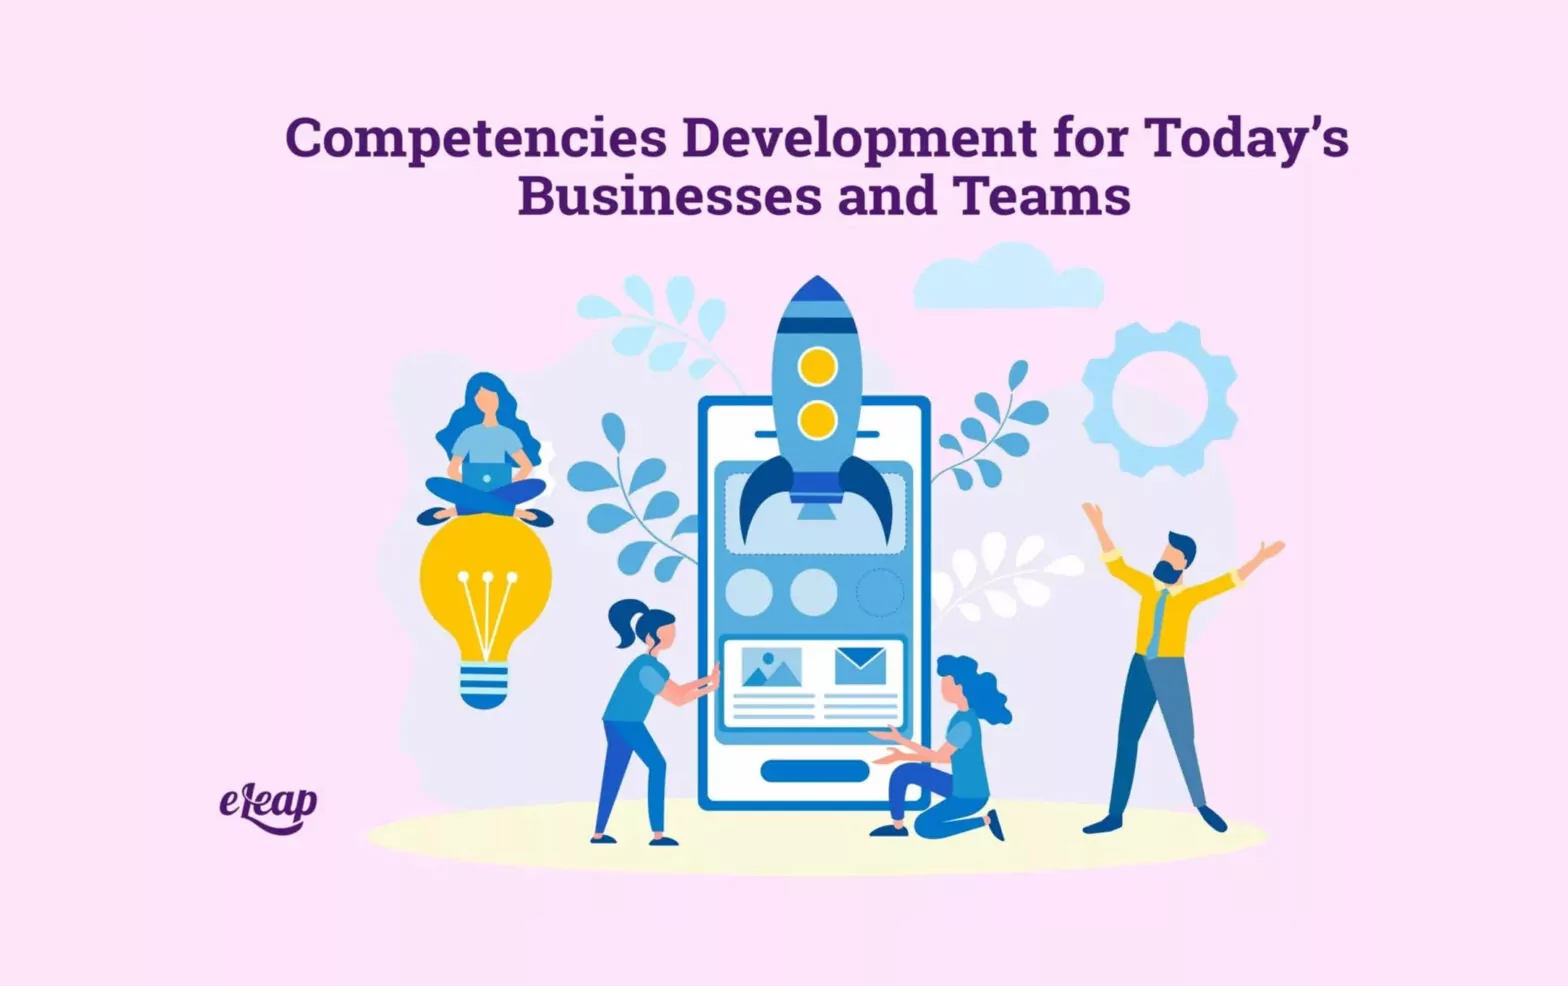 Competencies Development for Today’s Businesses and Teams